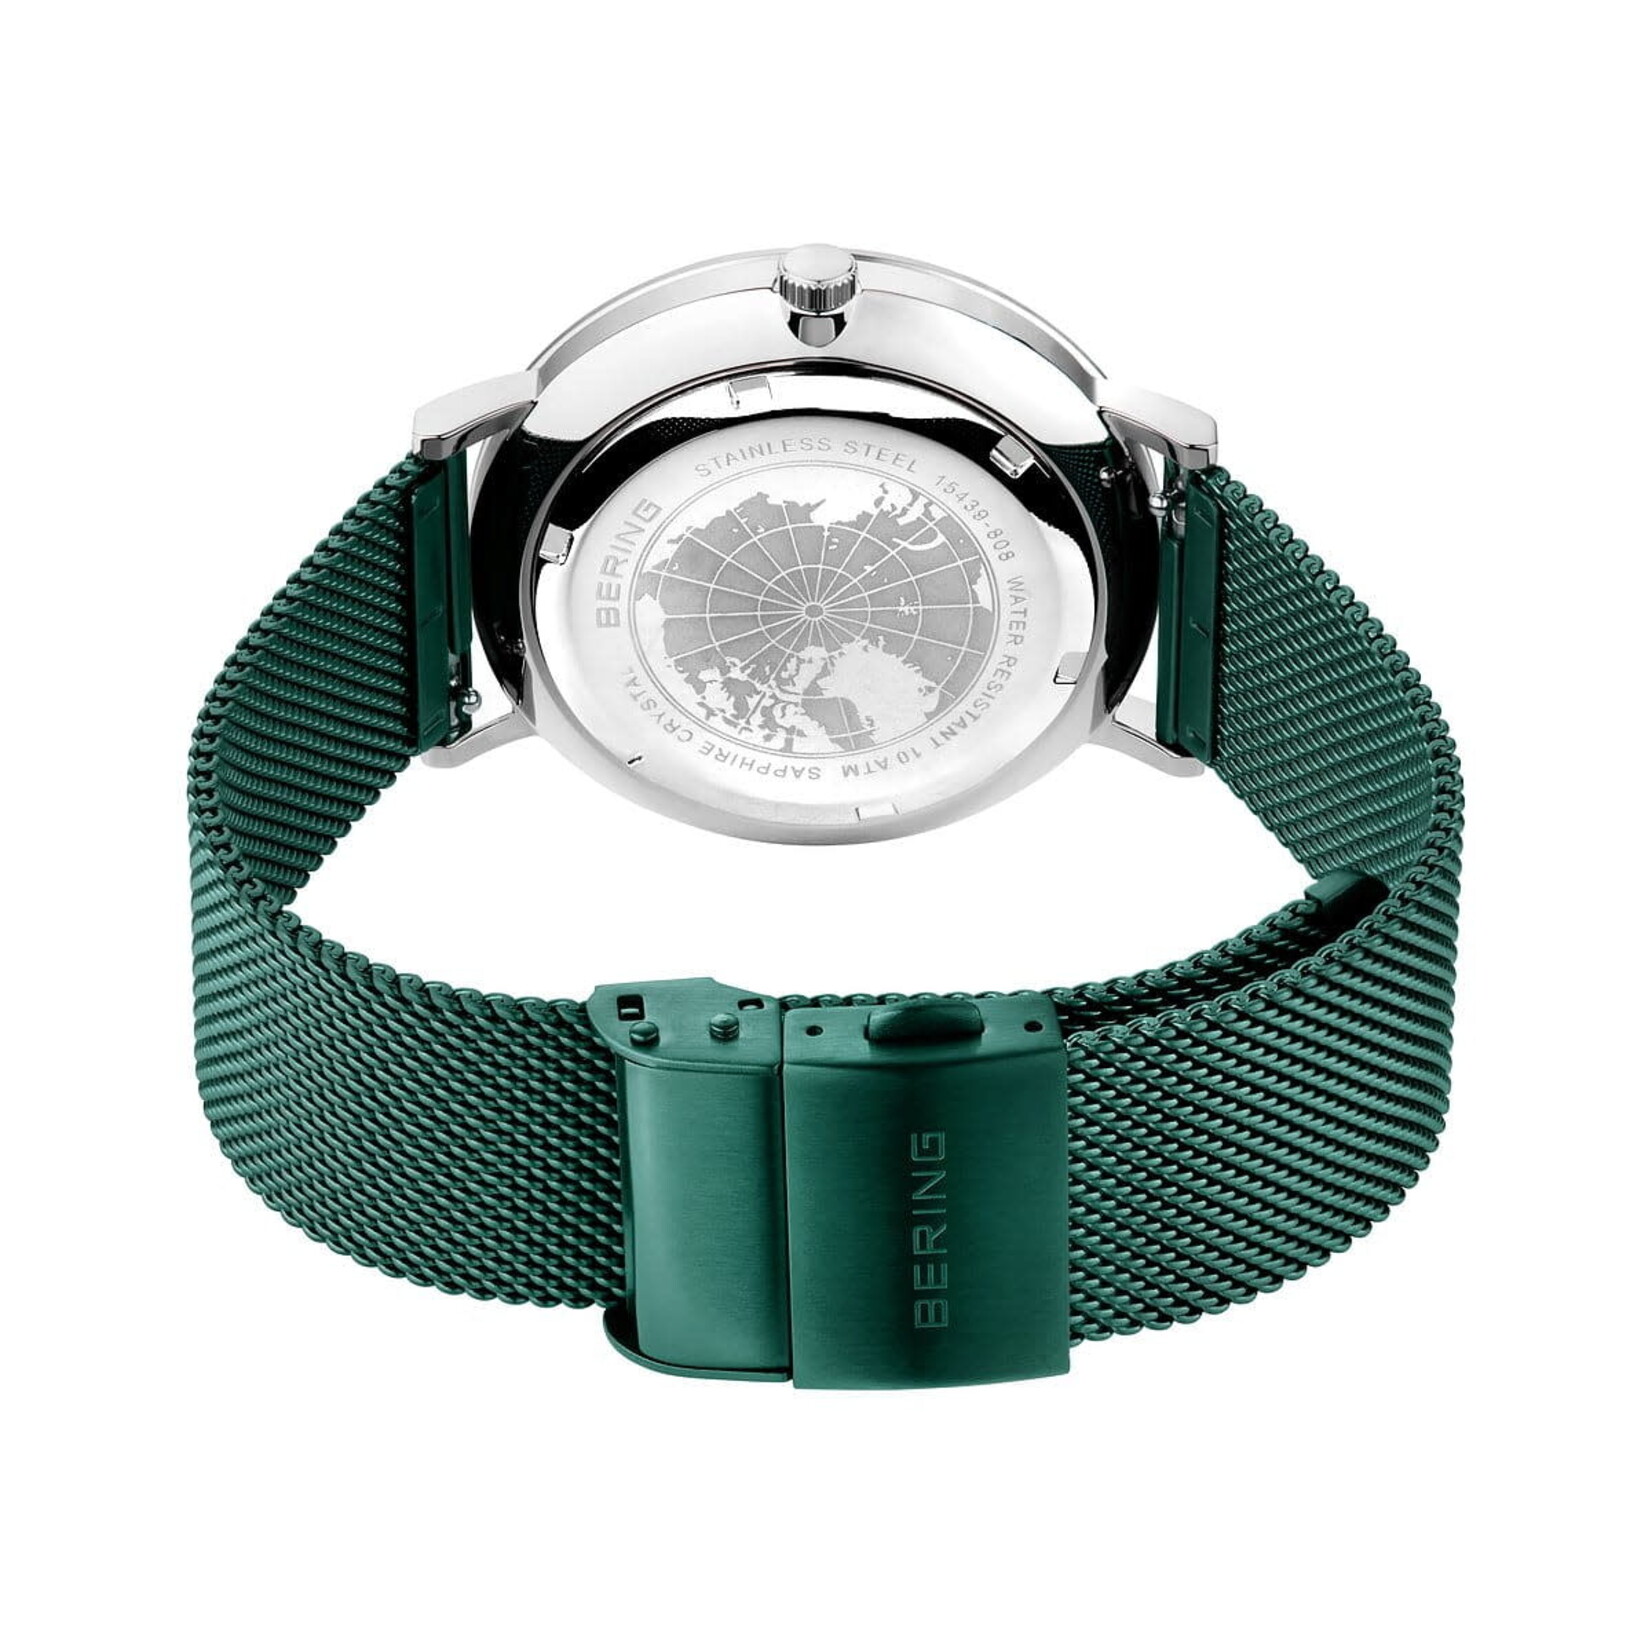 Bering Large Face Teal Solar Watch